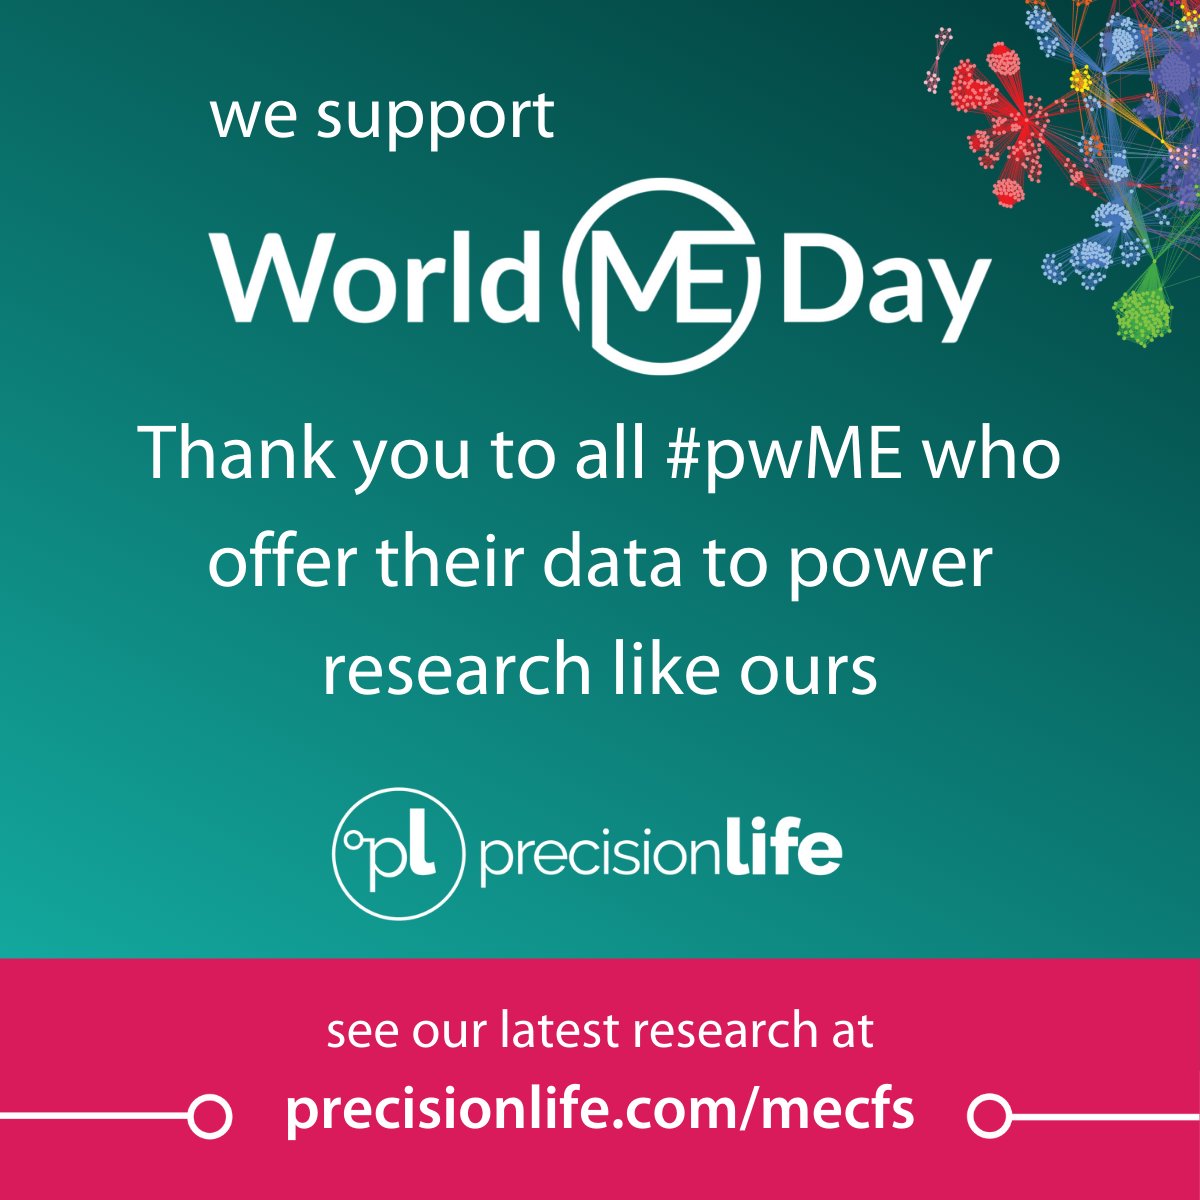 Thank you to everyone living with #MyalgicEncephalomyelitis who's been able to participate in research and share data. You are the power behind every one of our discoveries, which we hope will lead to better diagnosis and treatments. #pwME #MyalgicE #WorldMEDay #MEAwarenessDay